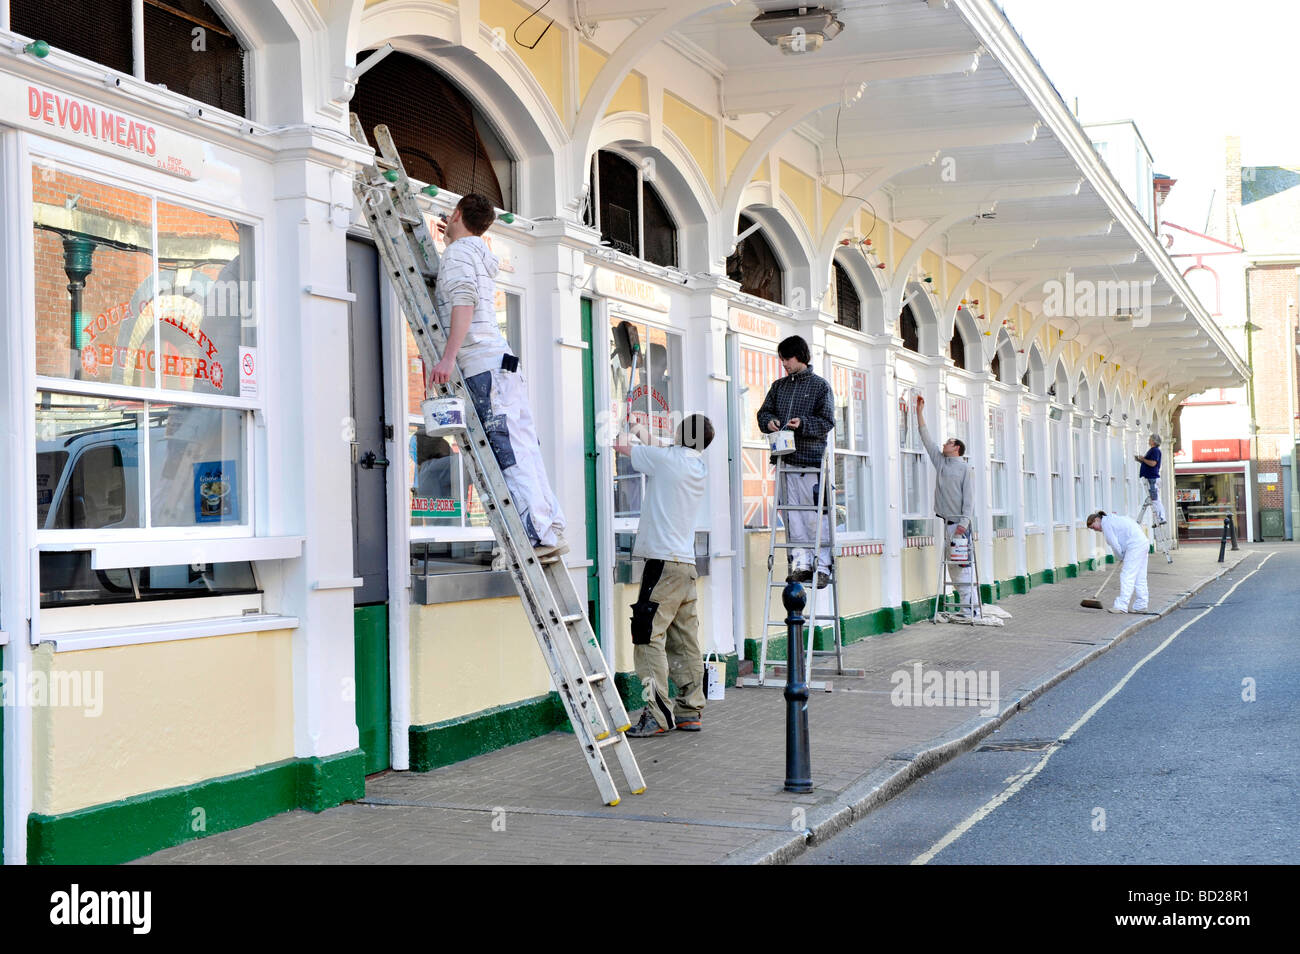 Historic Butchers row in Barnstaple Devon gets a paint makeover by workers in the build up to Easter Stock Photo